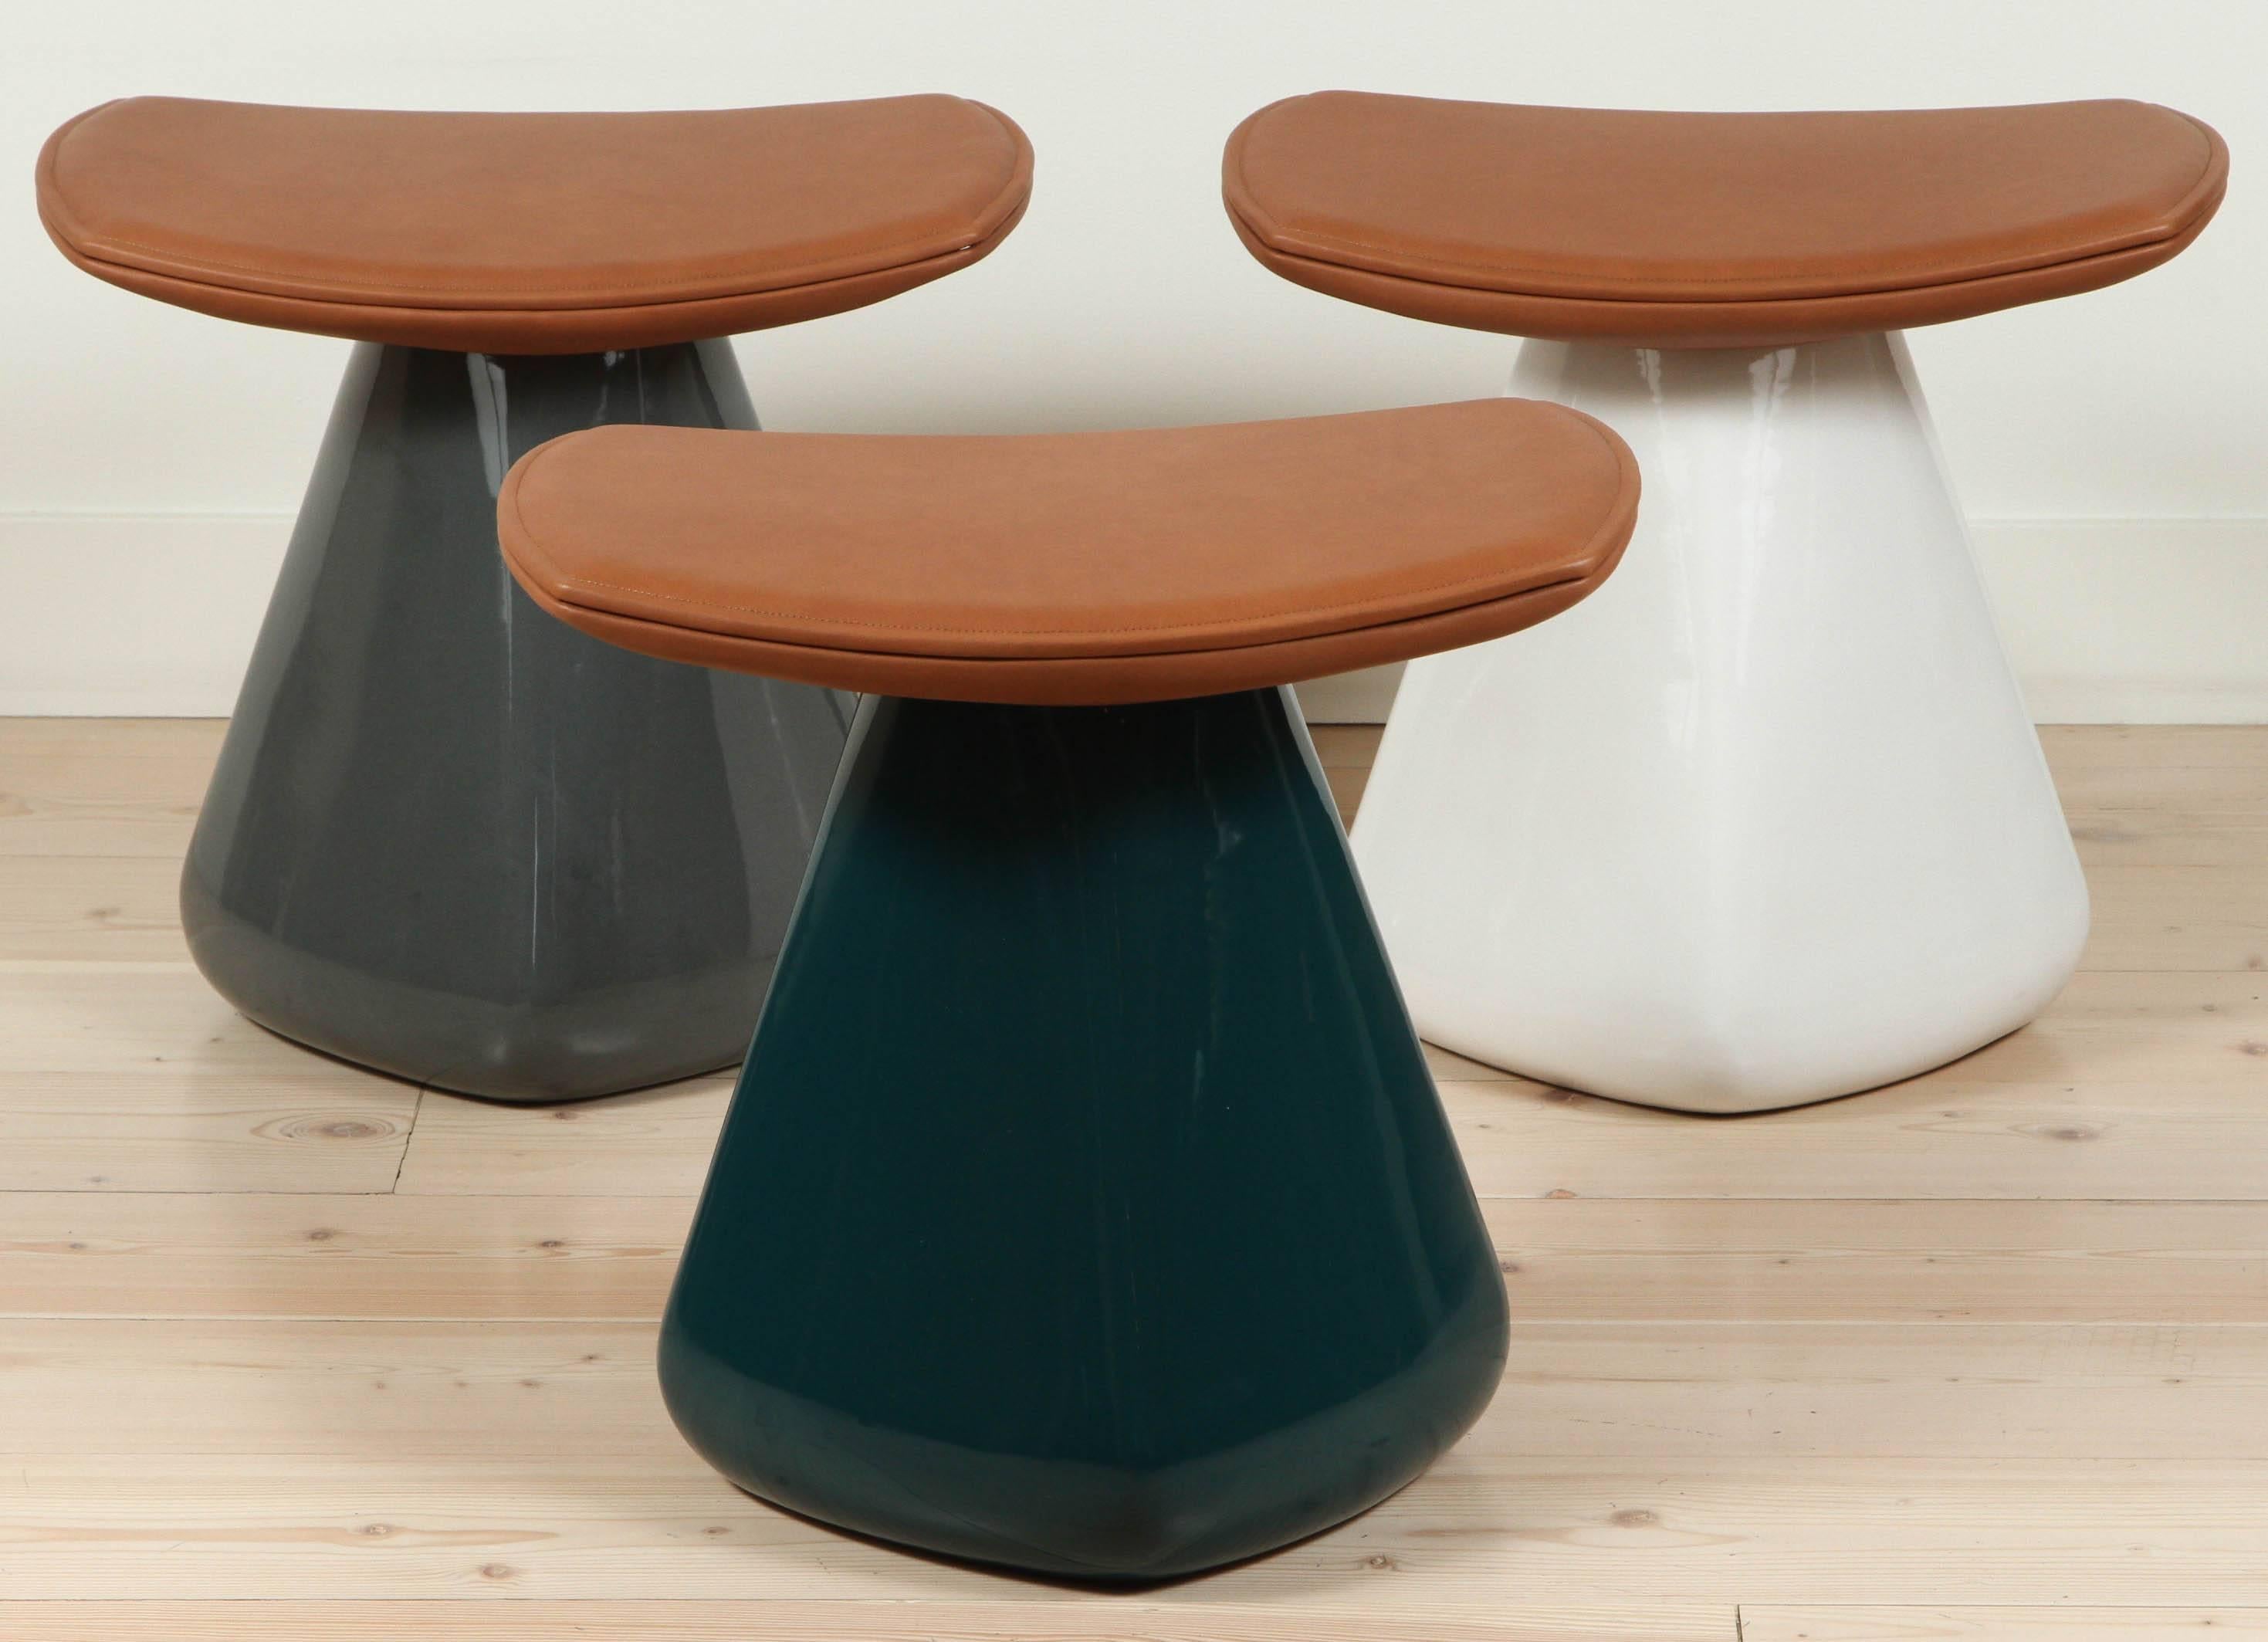 Dam stool by Collection Particulière.